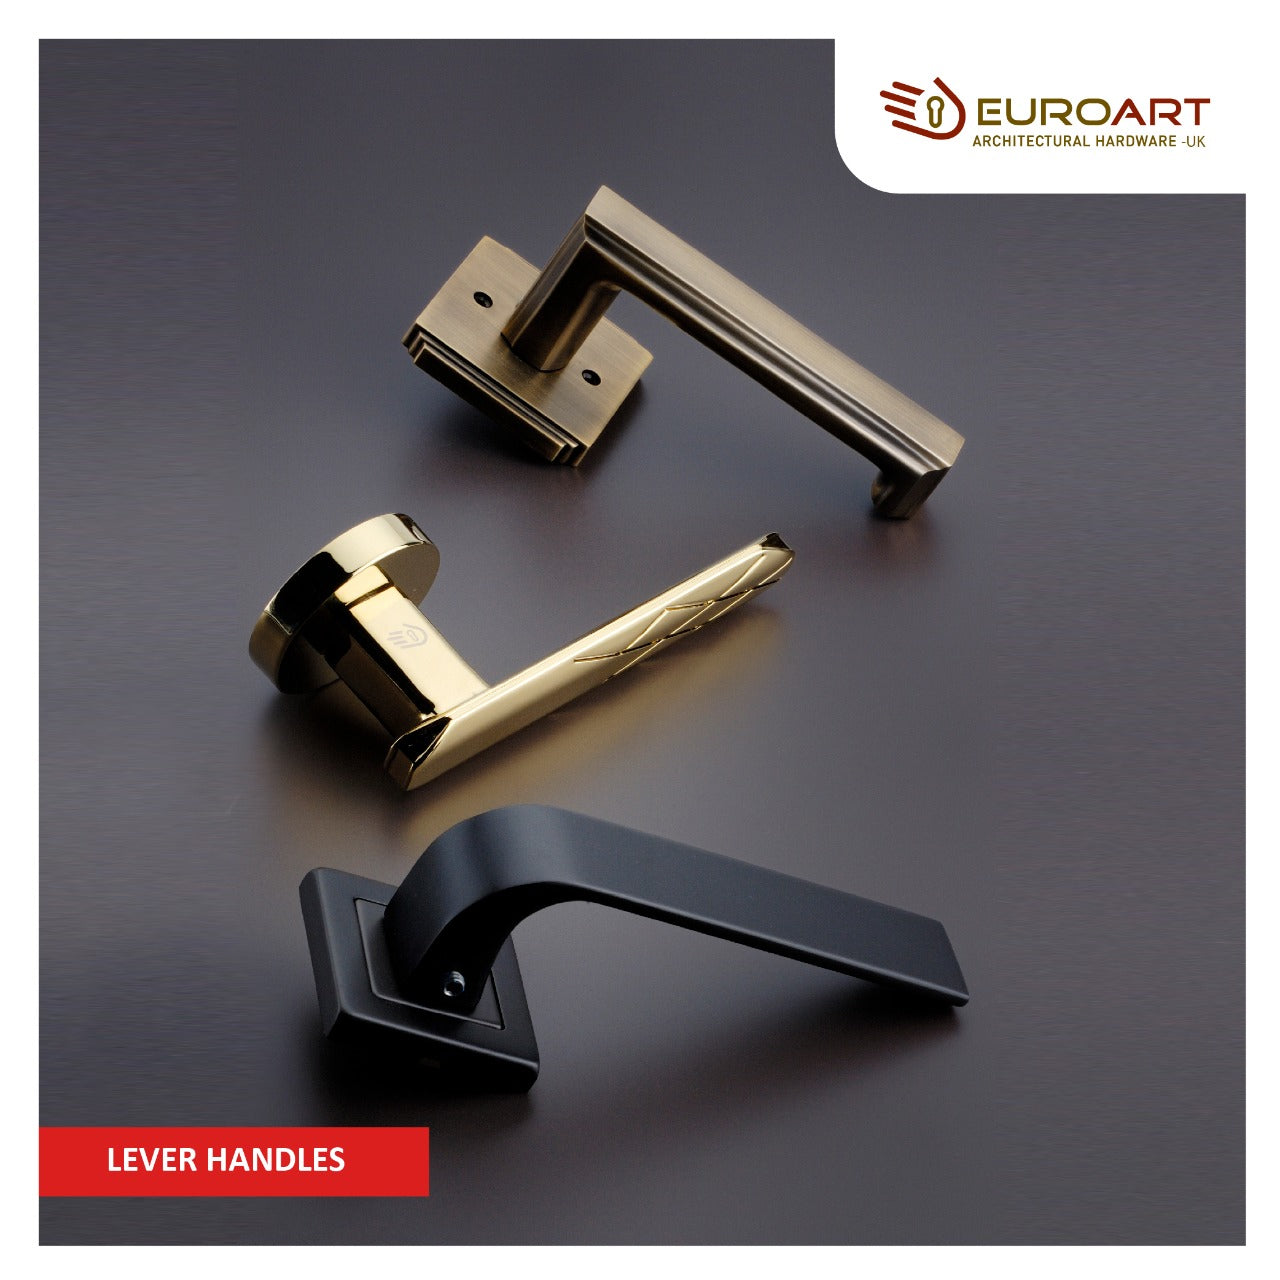 EuroArt Lever Handles - Stylish and Functional Door Accessories for Your Home or Office